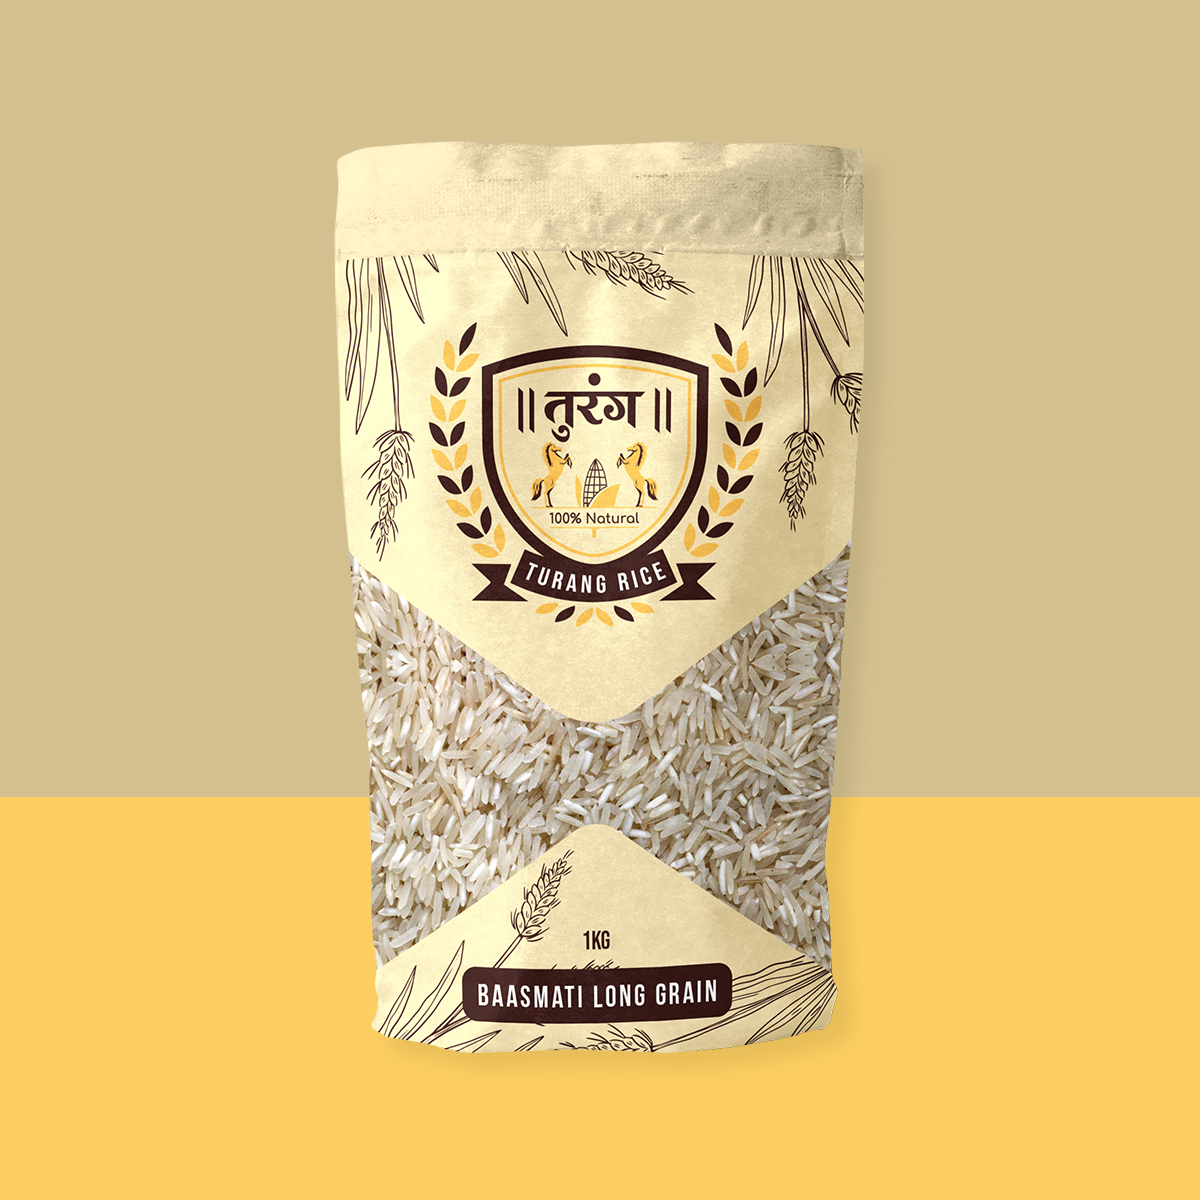 Packaging Design by Jayant